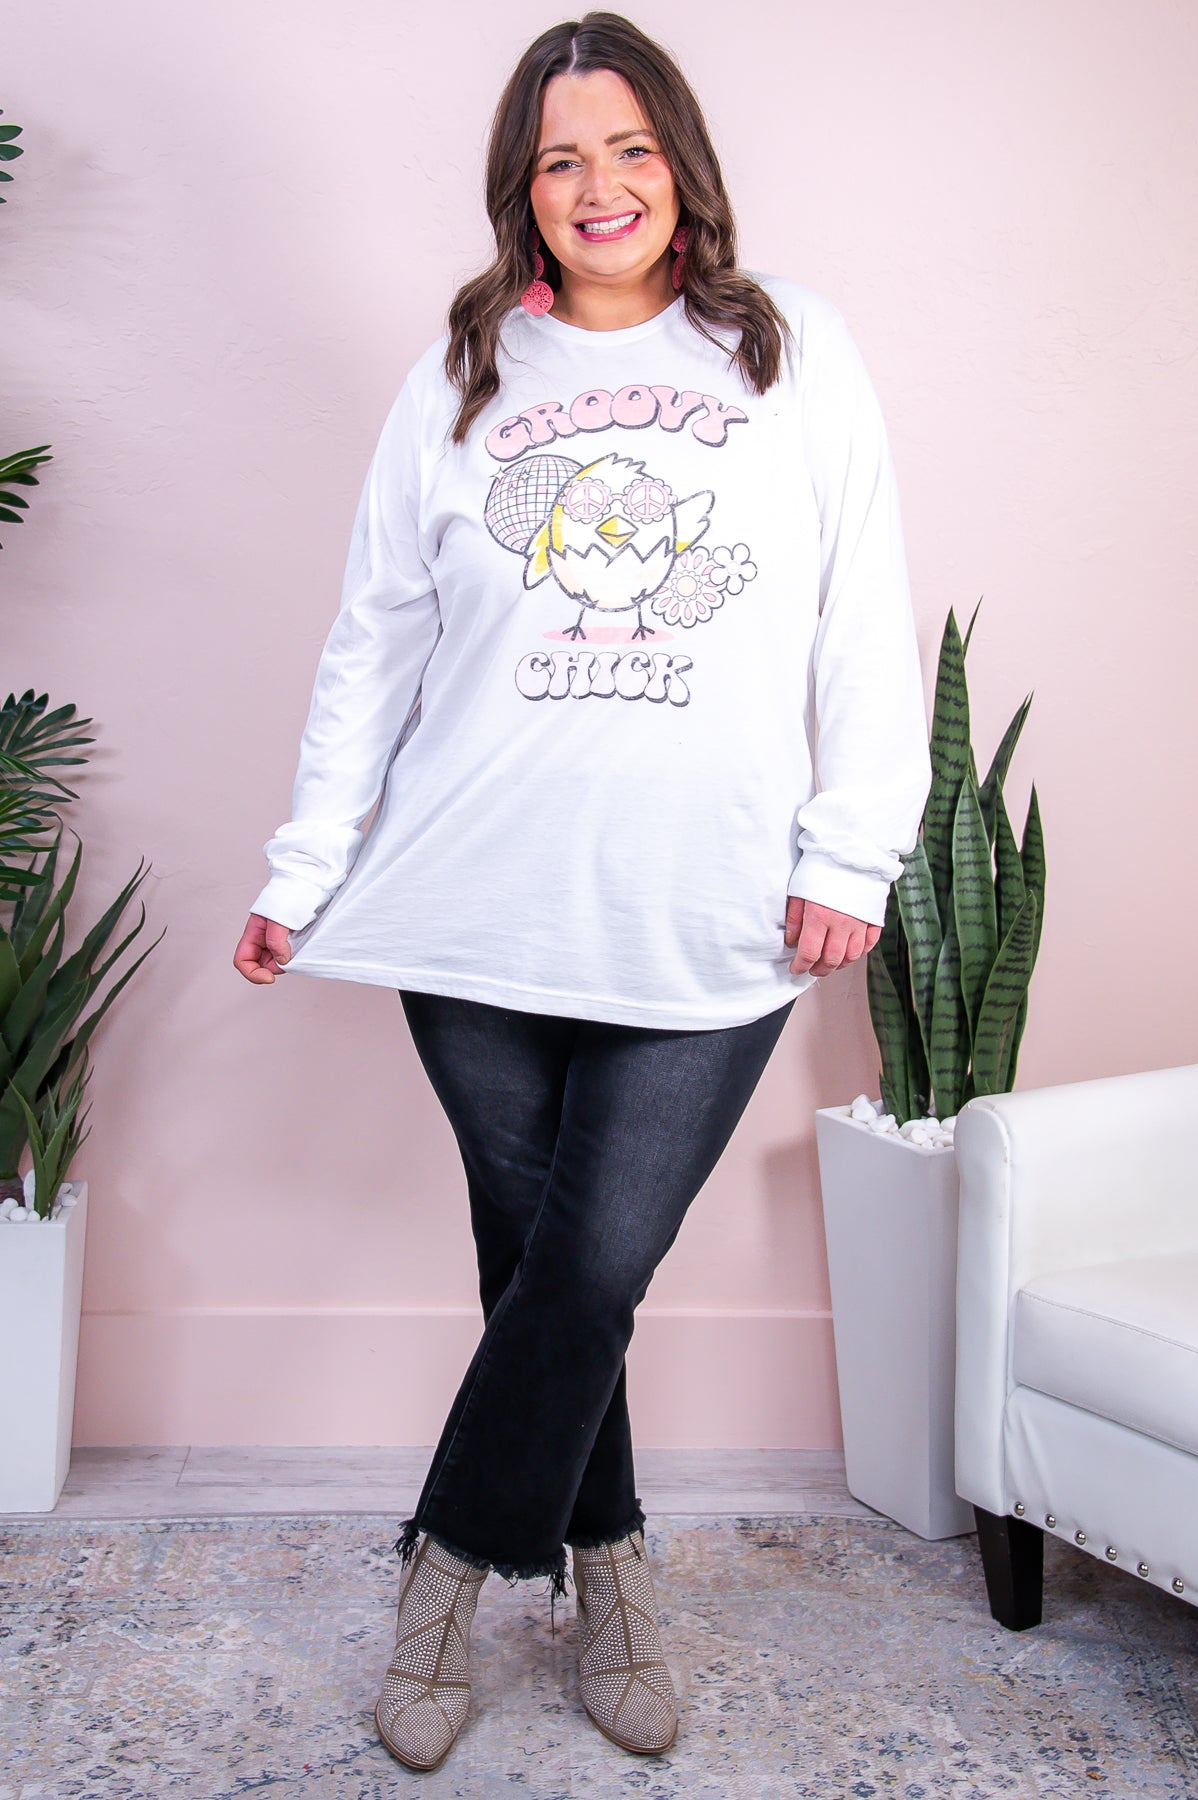 Groovy Chic White Long Sleeve Graphic Tee - A3239WH